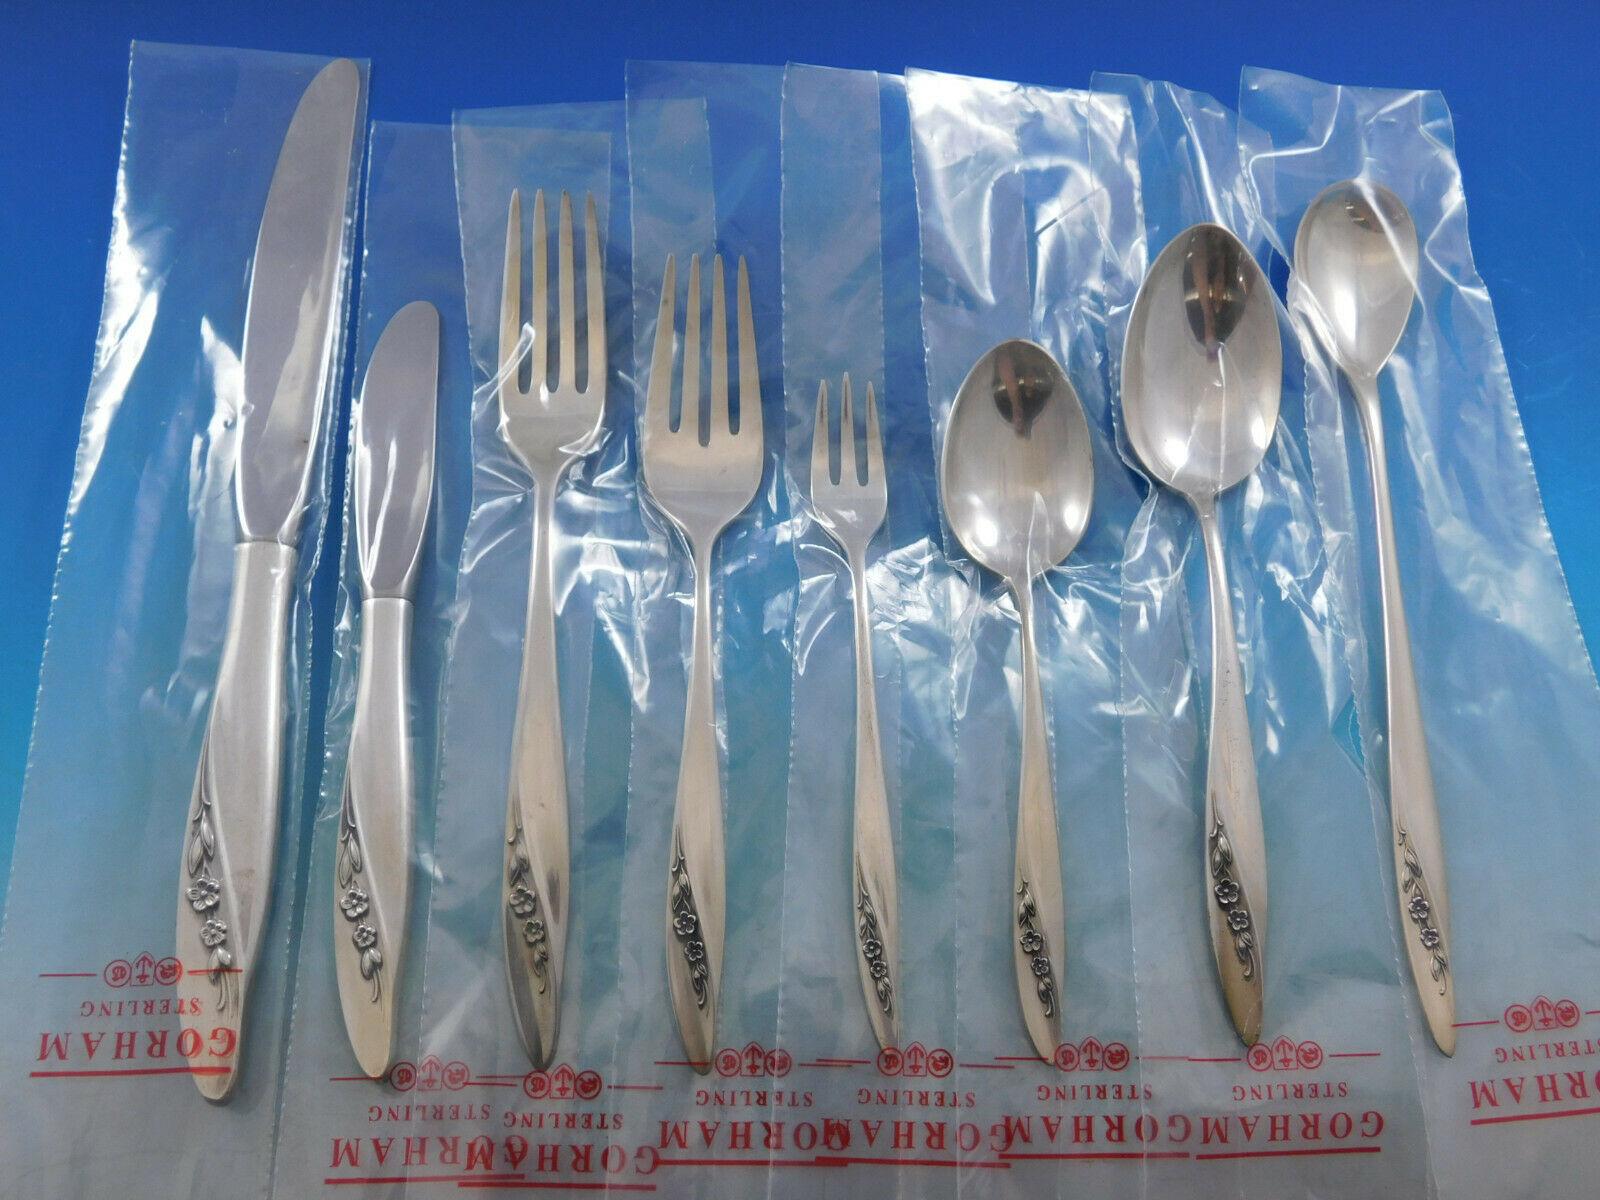 Unused Blithe spirit by Gorham sterling silver flatware set - 72 pieces. This set includes:

8 knives, 9 1/8